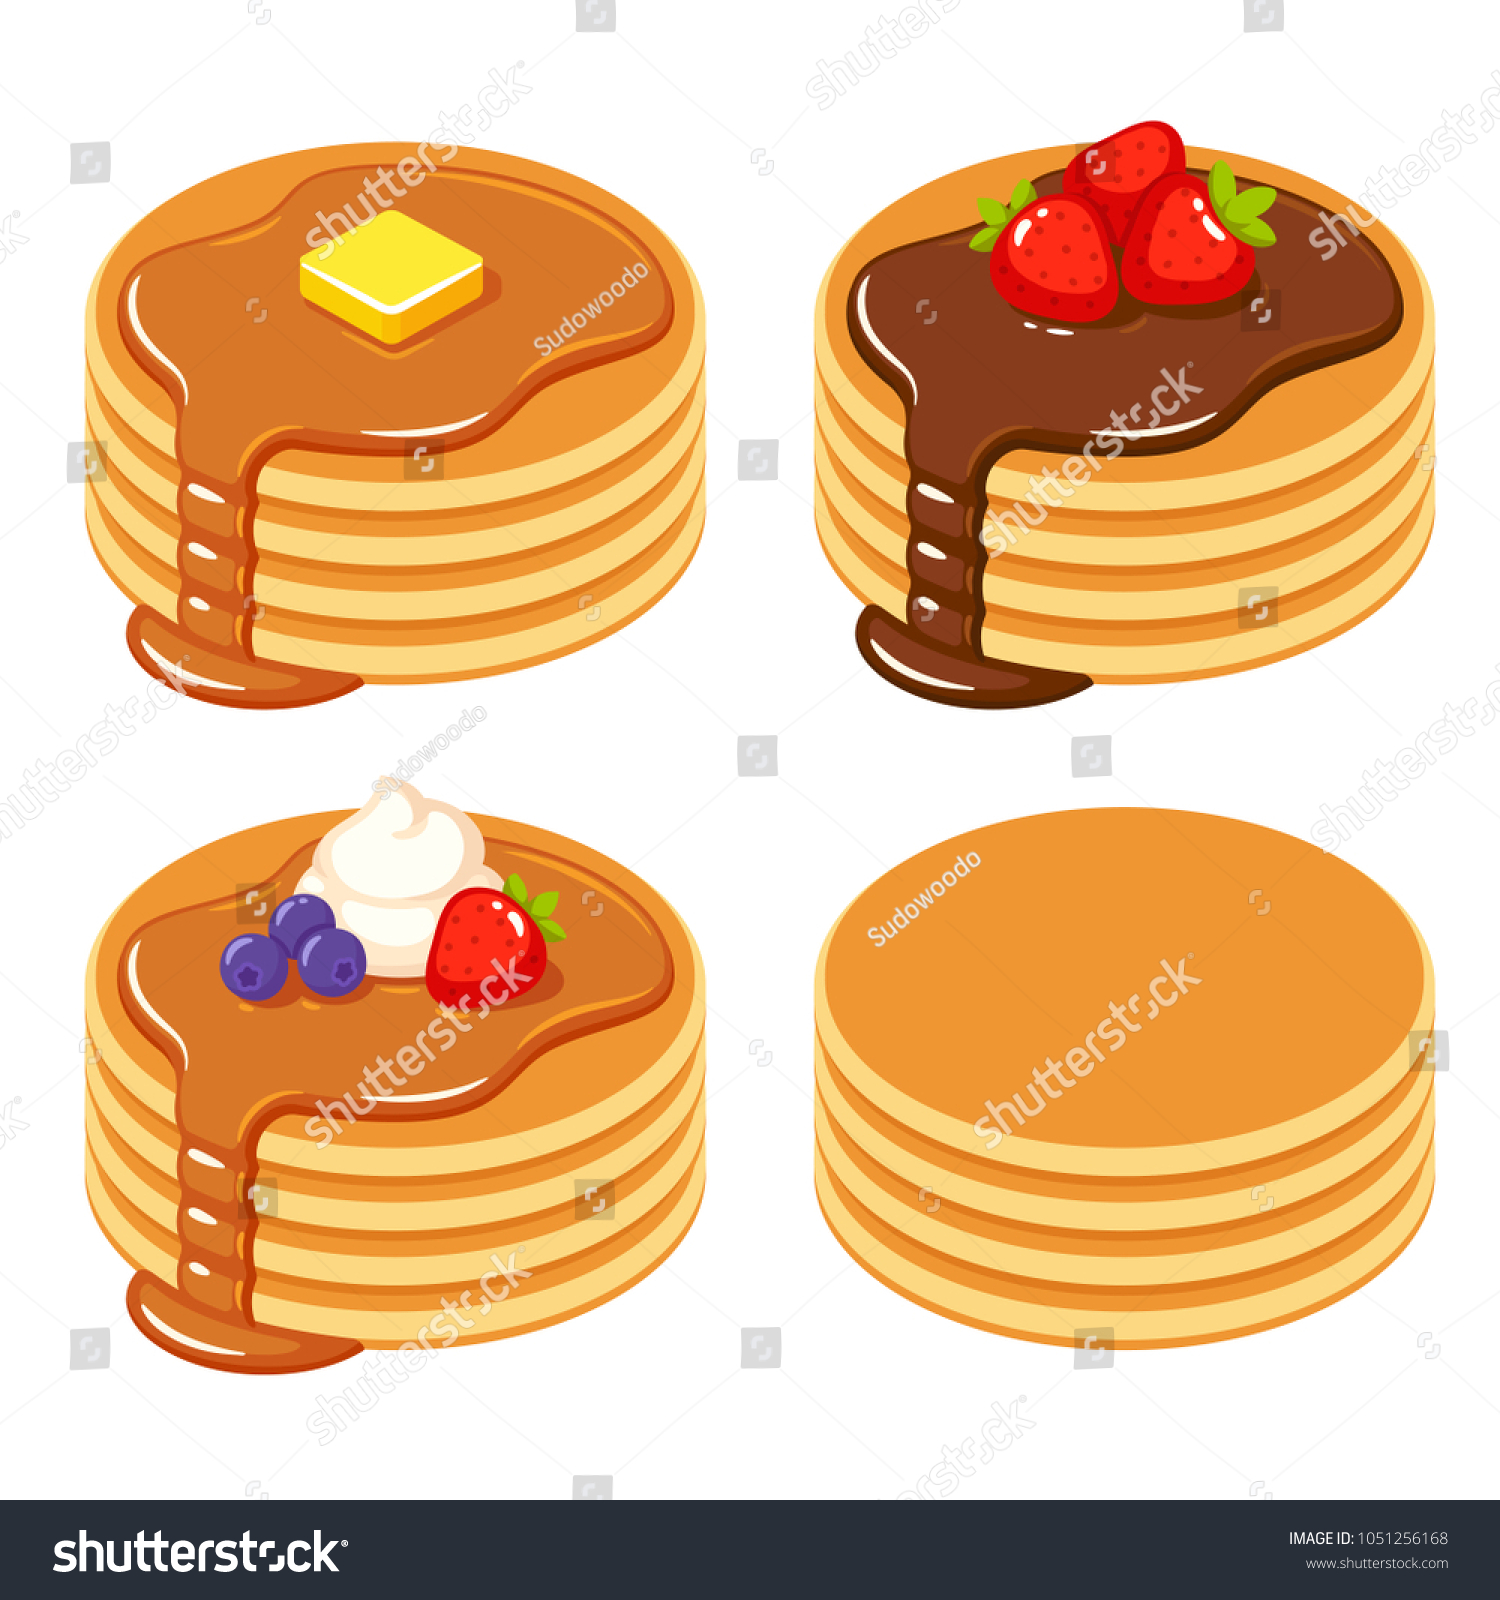 SVG of Set of pancakes with different toppings: honey and butter, chocolate syrup and fruit, and a stack of plain isolated pancakes. Traditional breakfast food vector illustration. svg